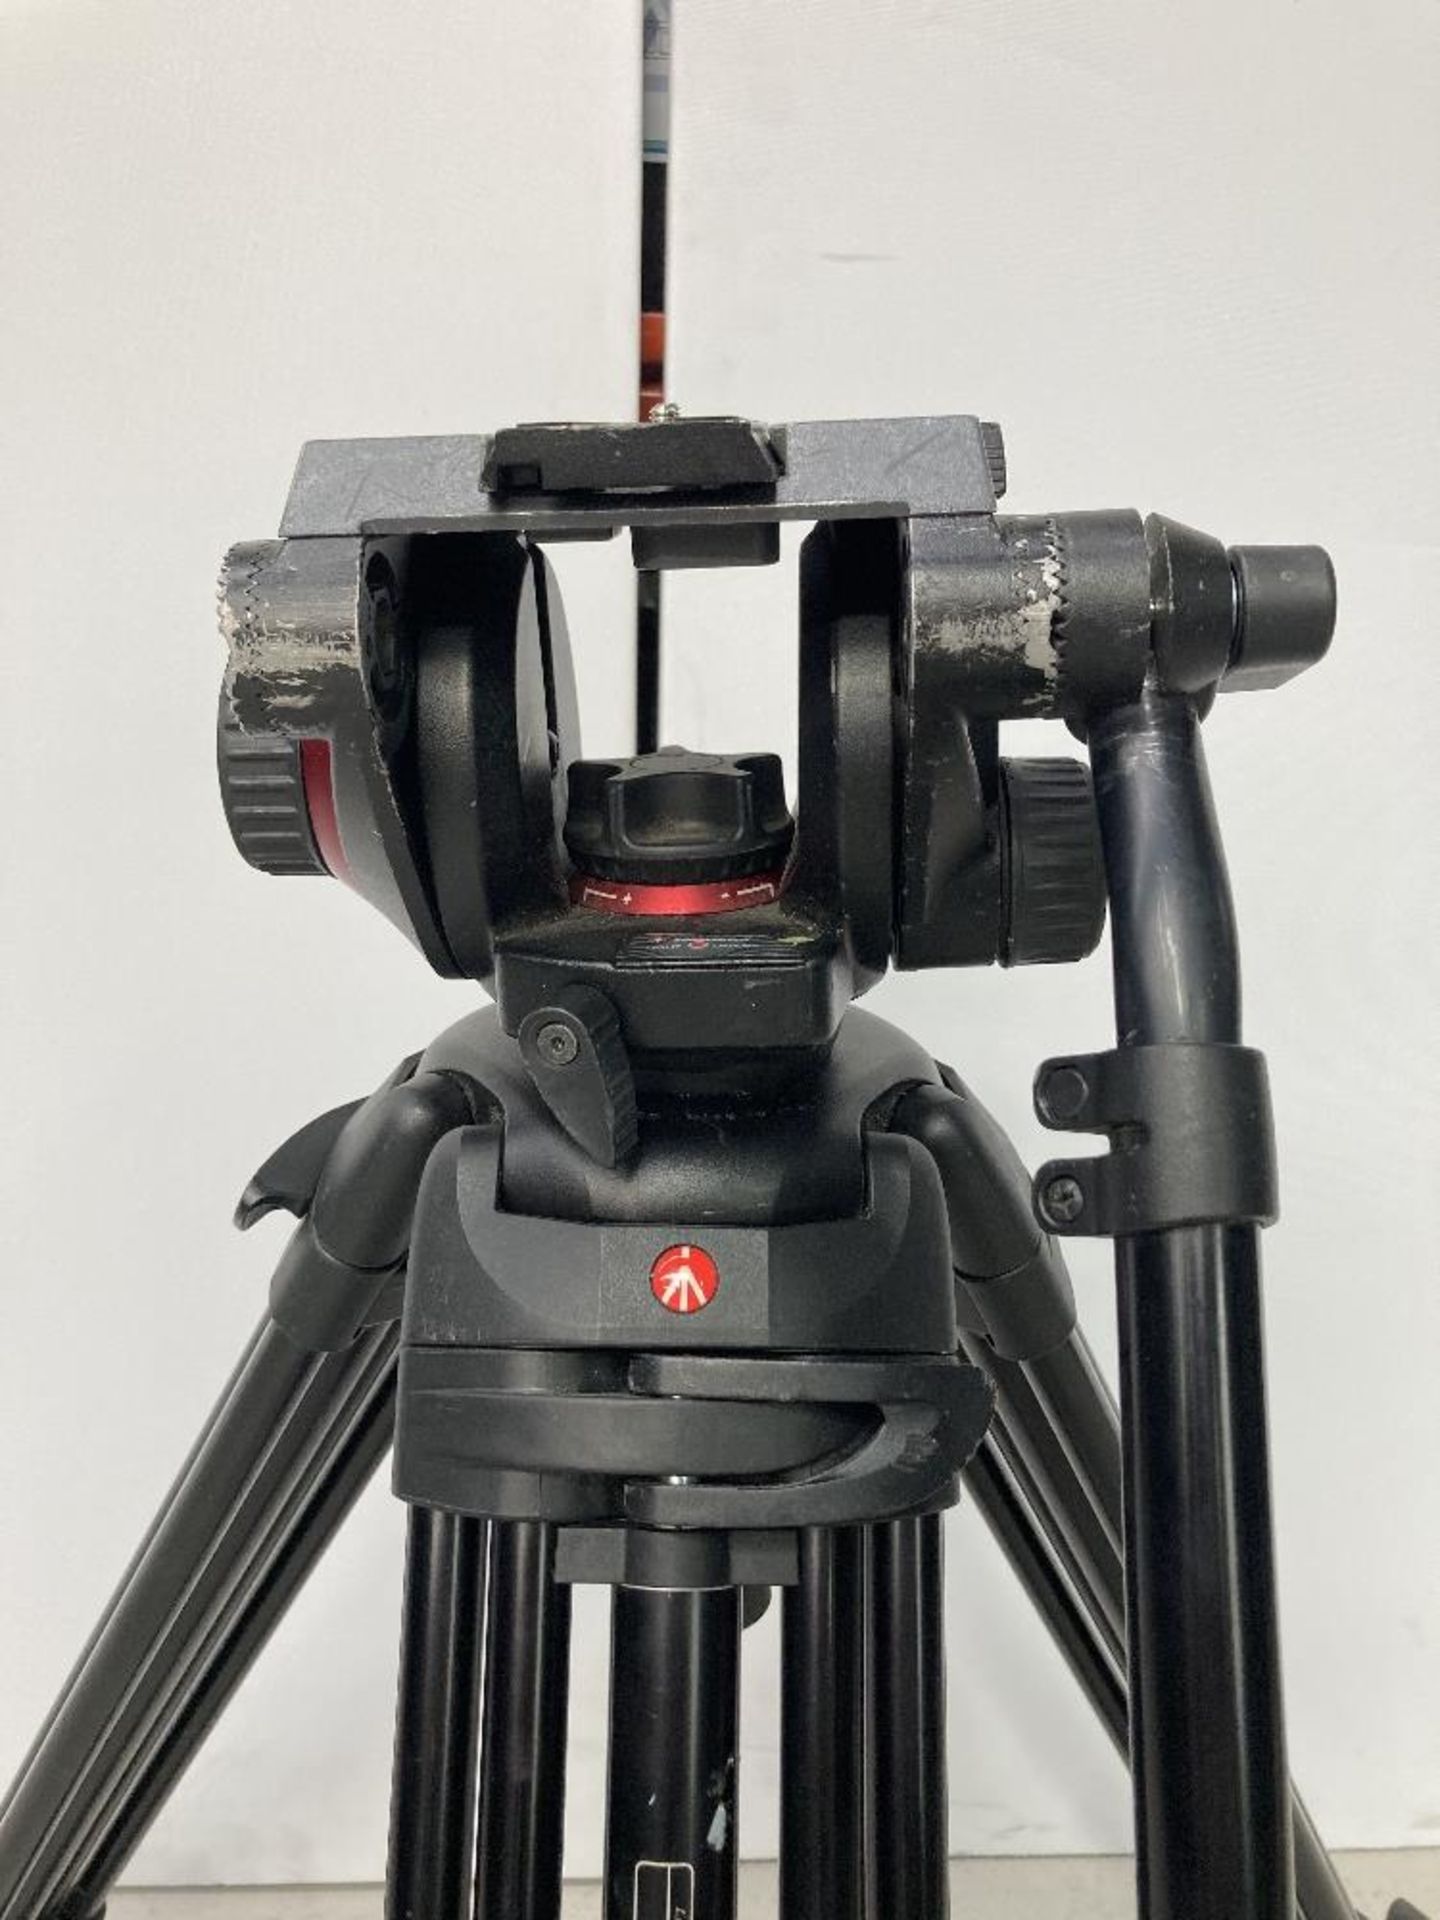 Manfrotto 504HD Tripod Head and 546B Tripod with Carbon Fibre Legs with Manfrotto Carry Case - Image 2 of 7